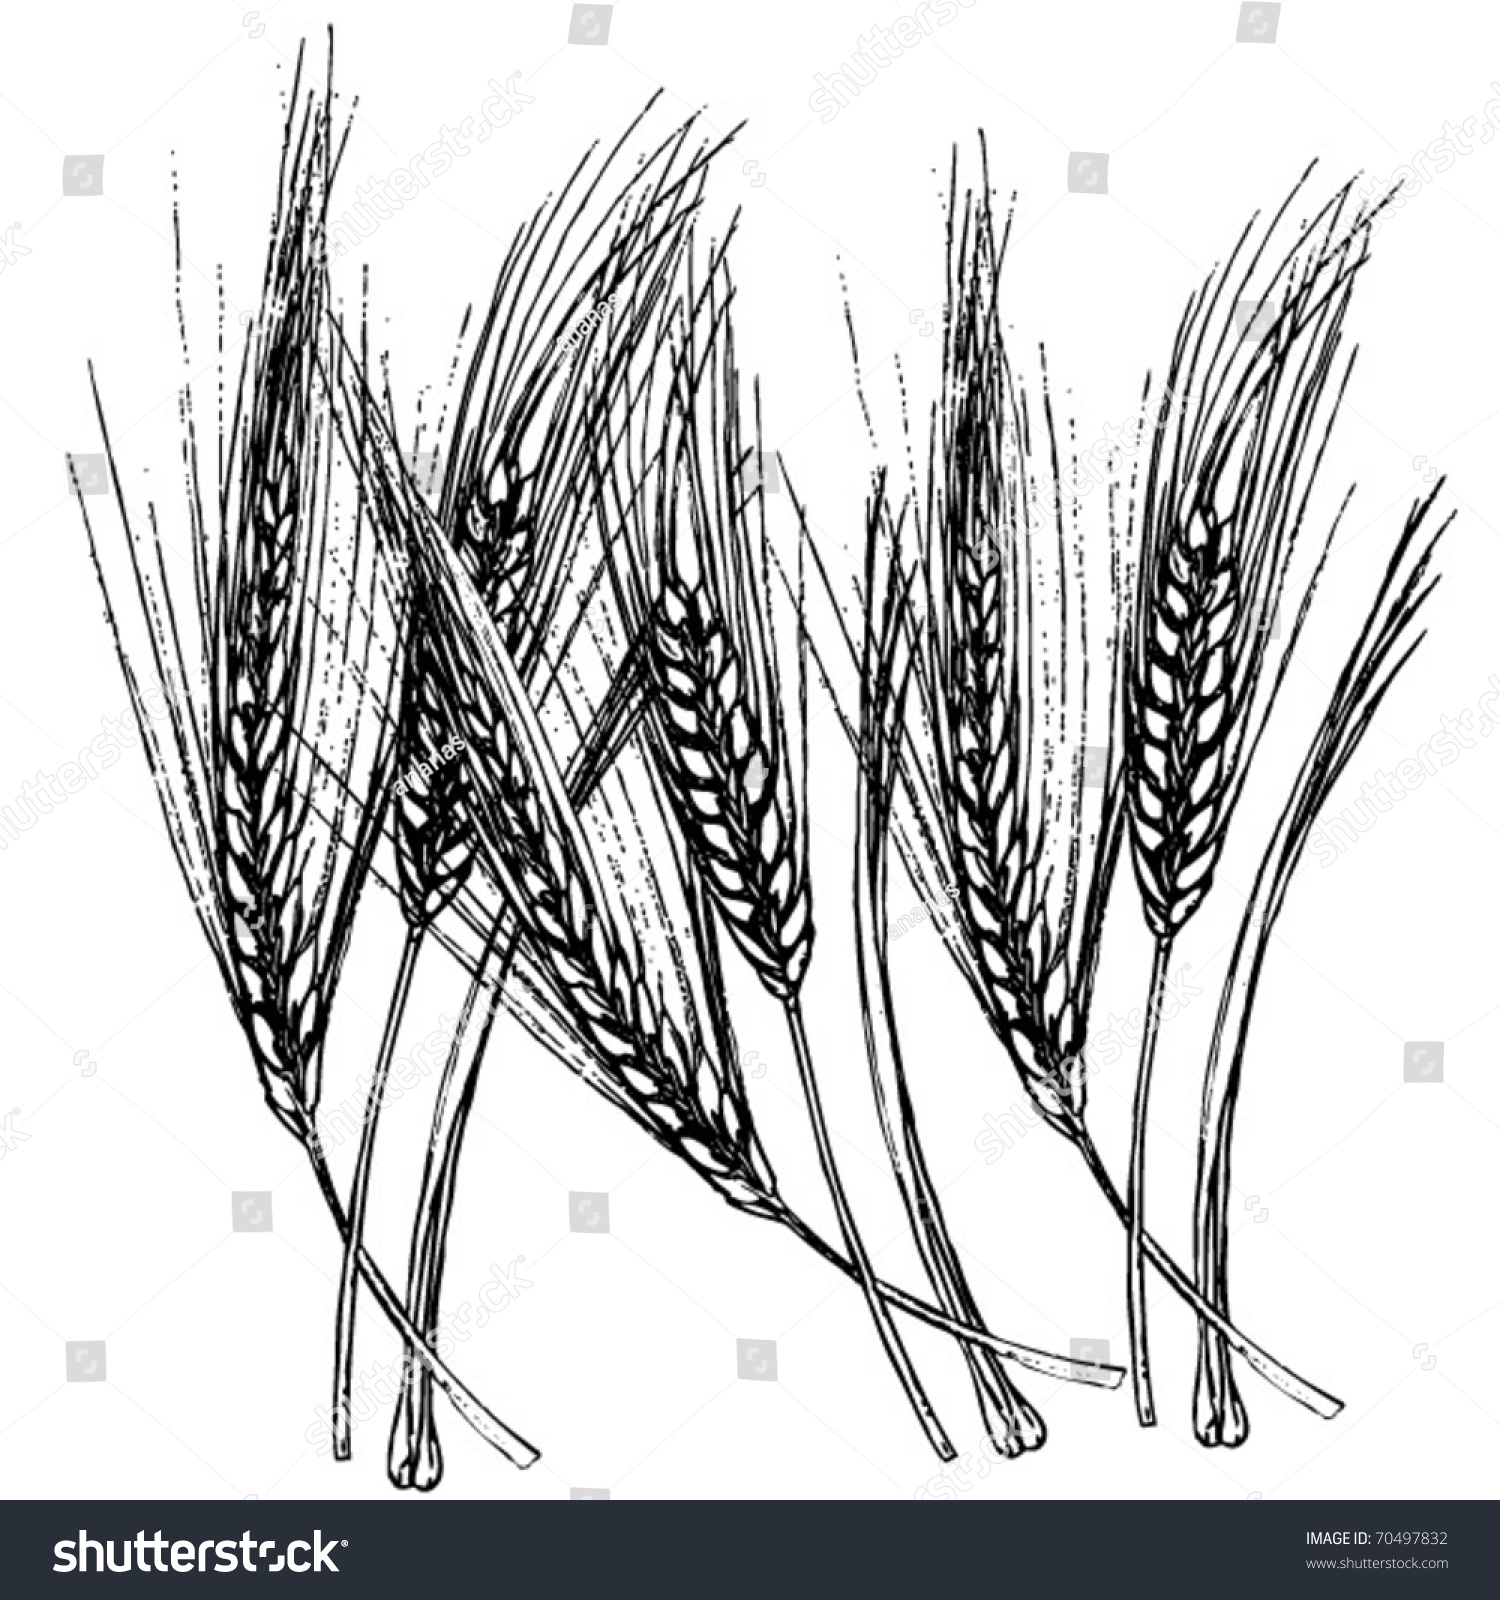 Wheat Drawing Stock Vector 70497832 - Shutterstock